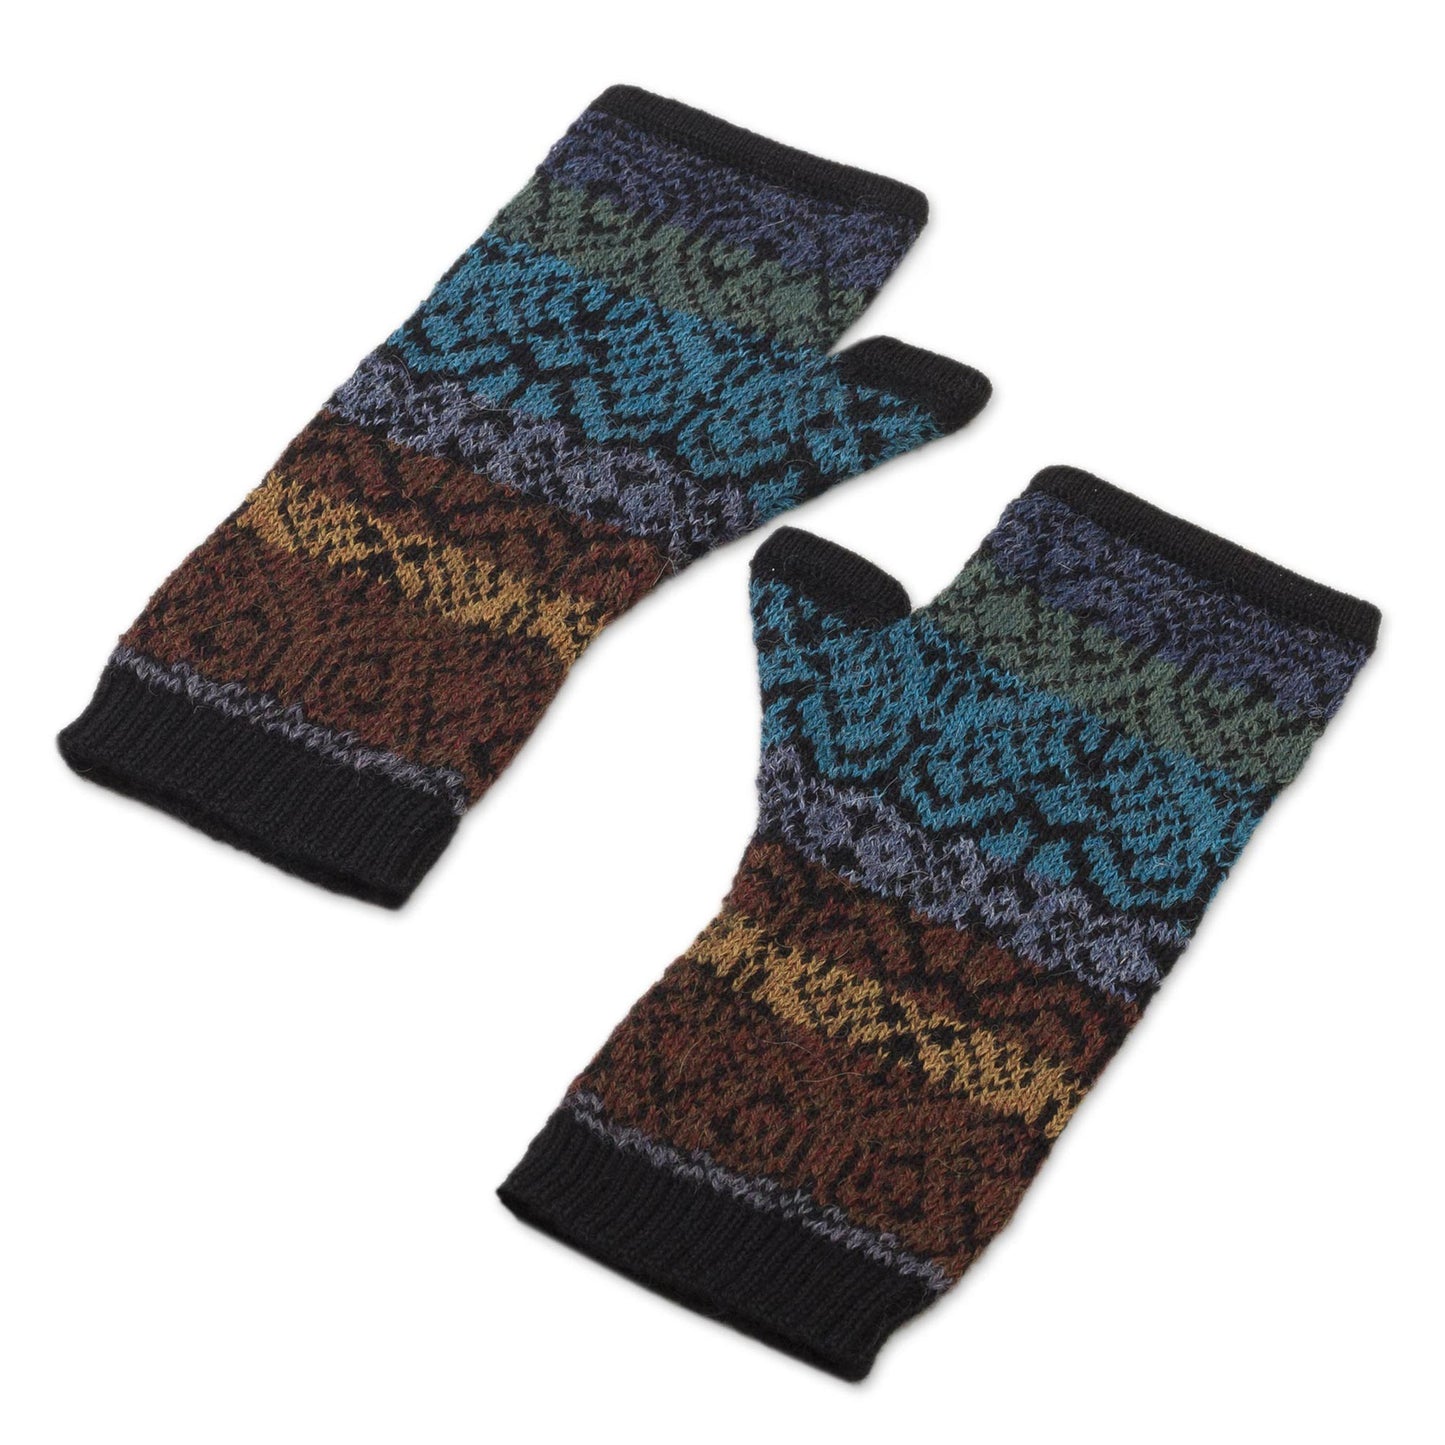 Earth and Sky Inca Inspired Alpaca Knit Fingerless Mitts